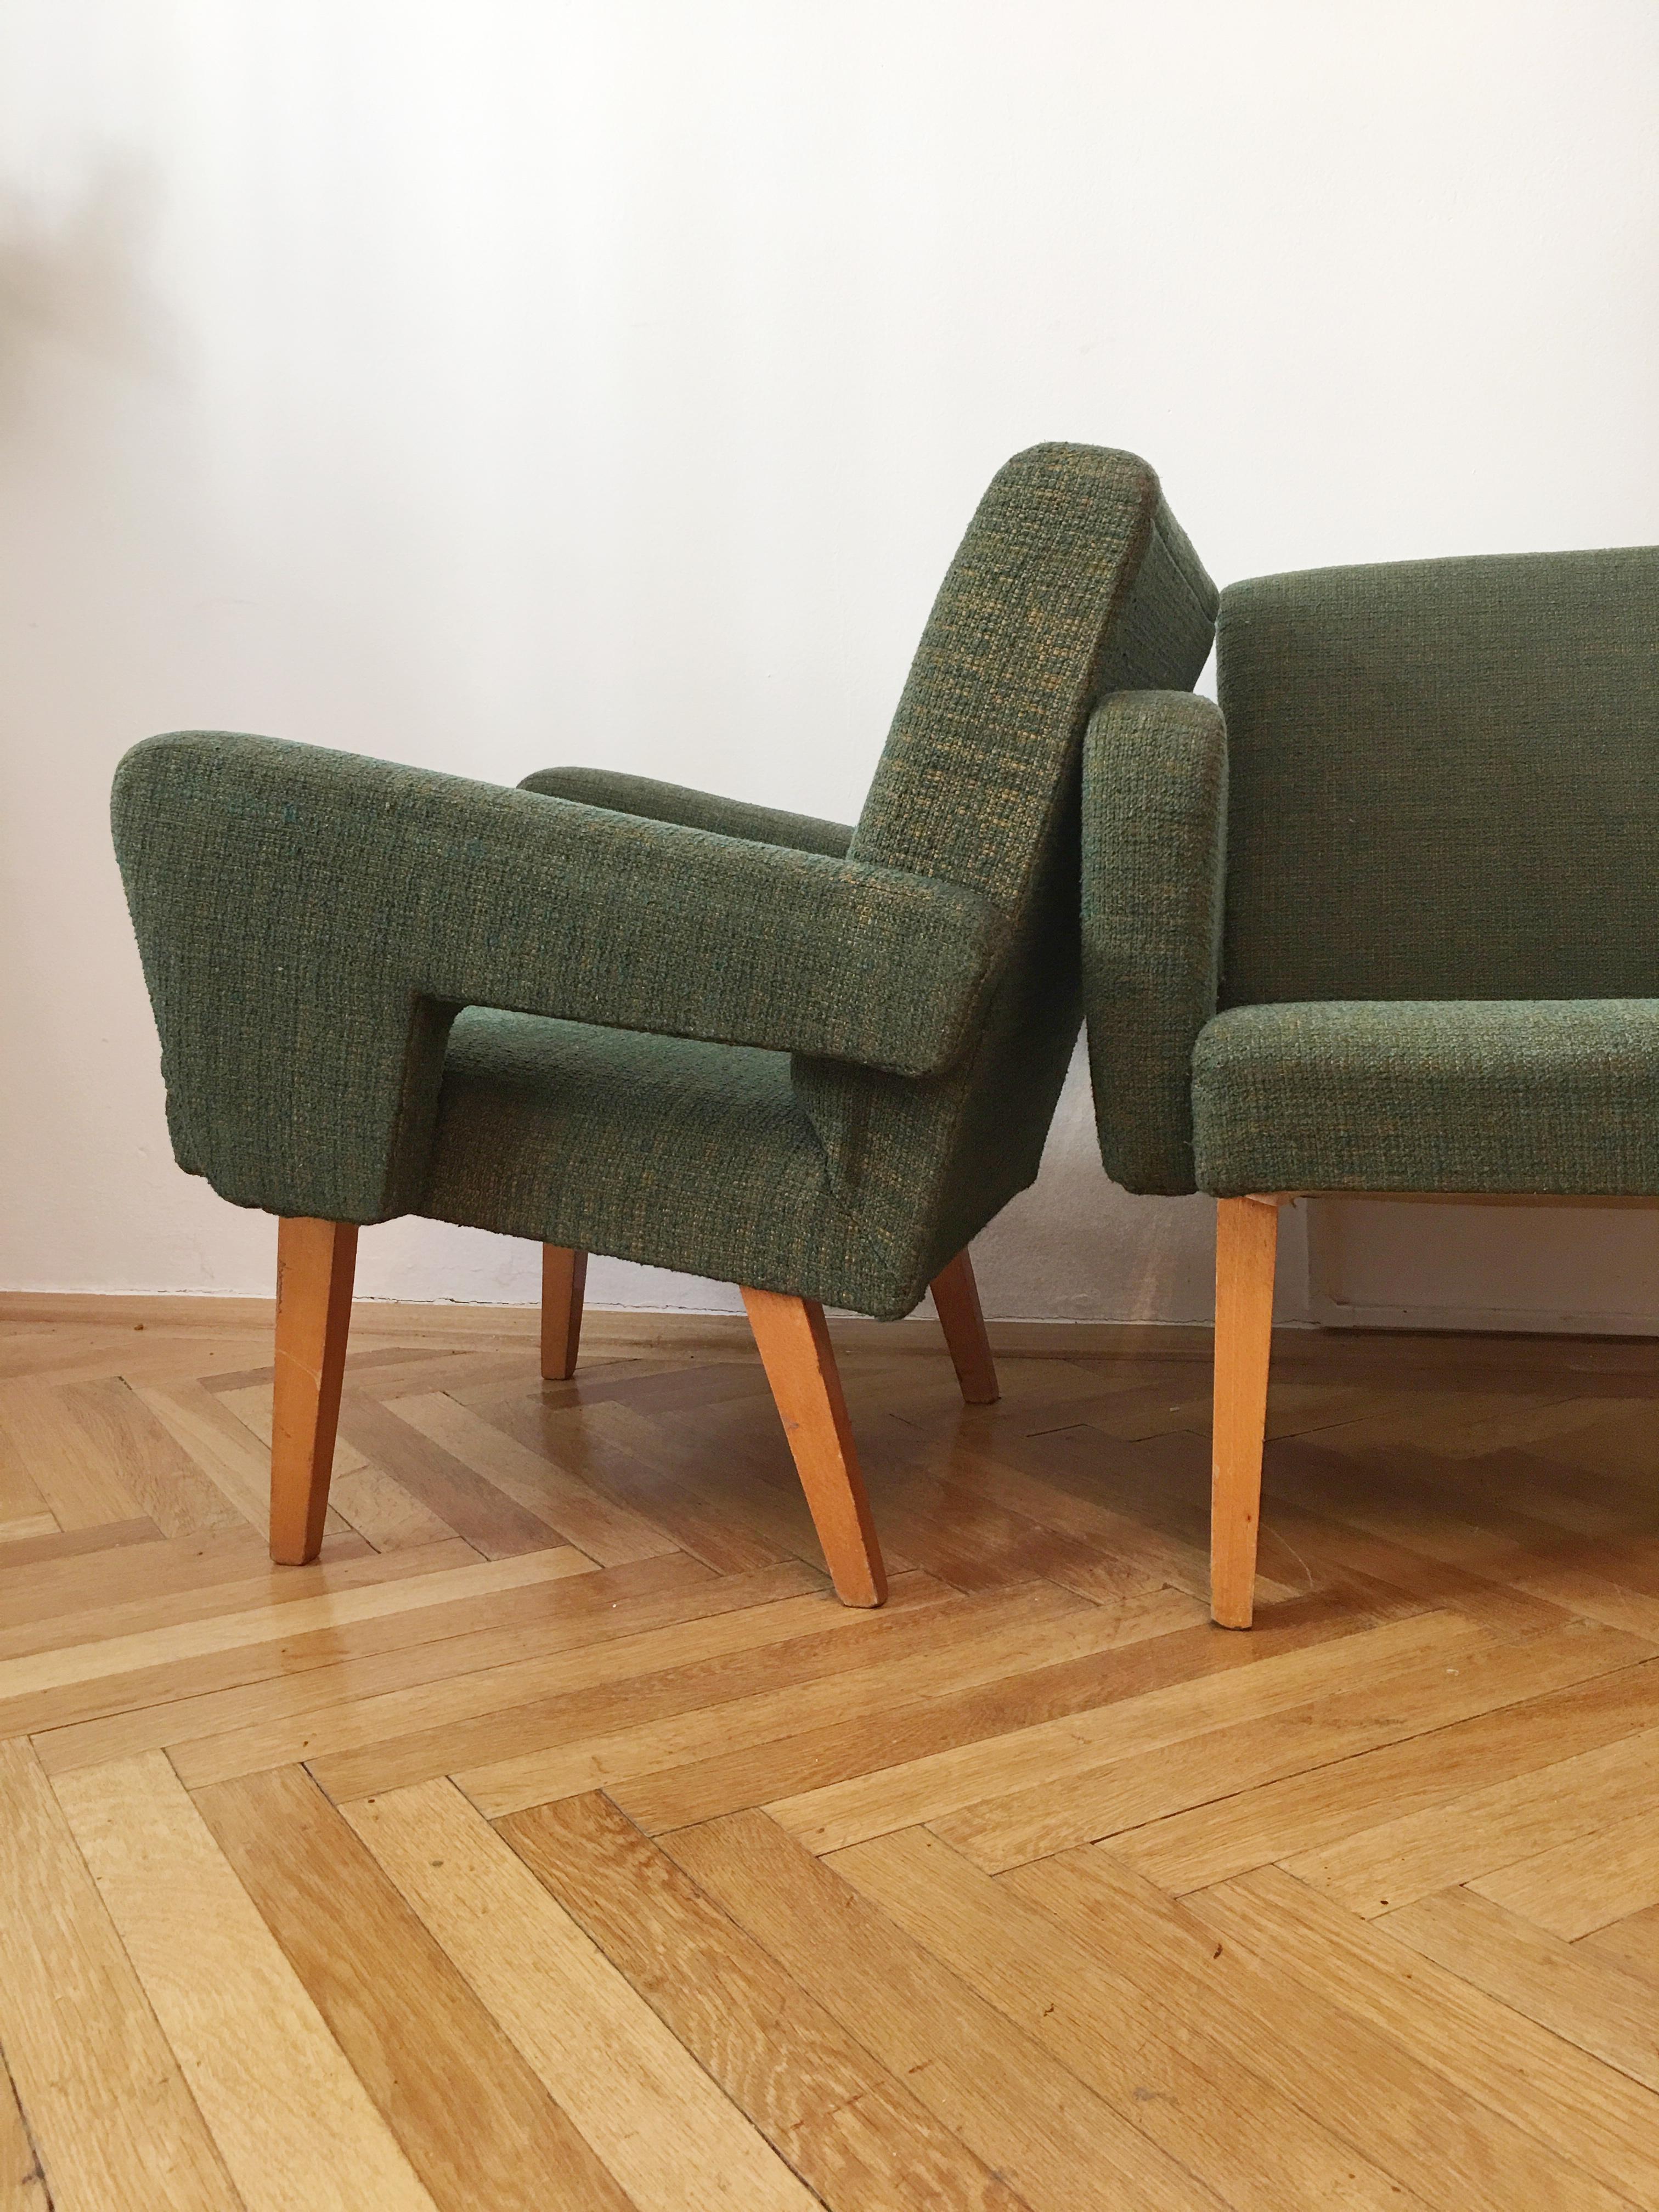 Mid-20th Century Green Vintage Rocket Armchairs by Jitona, 1960s, Pair For Sale